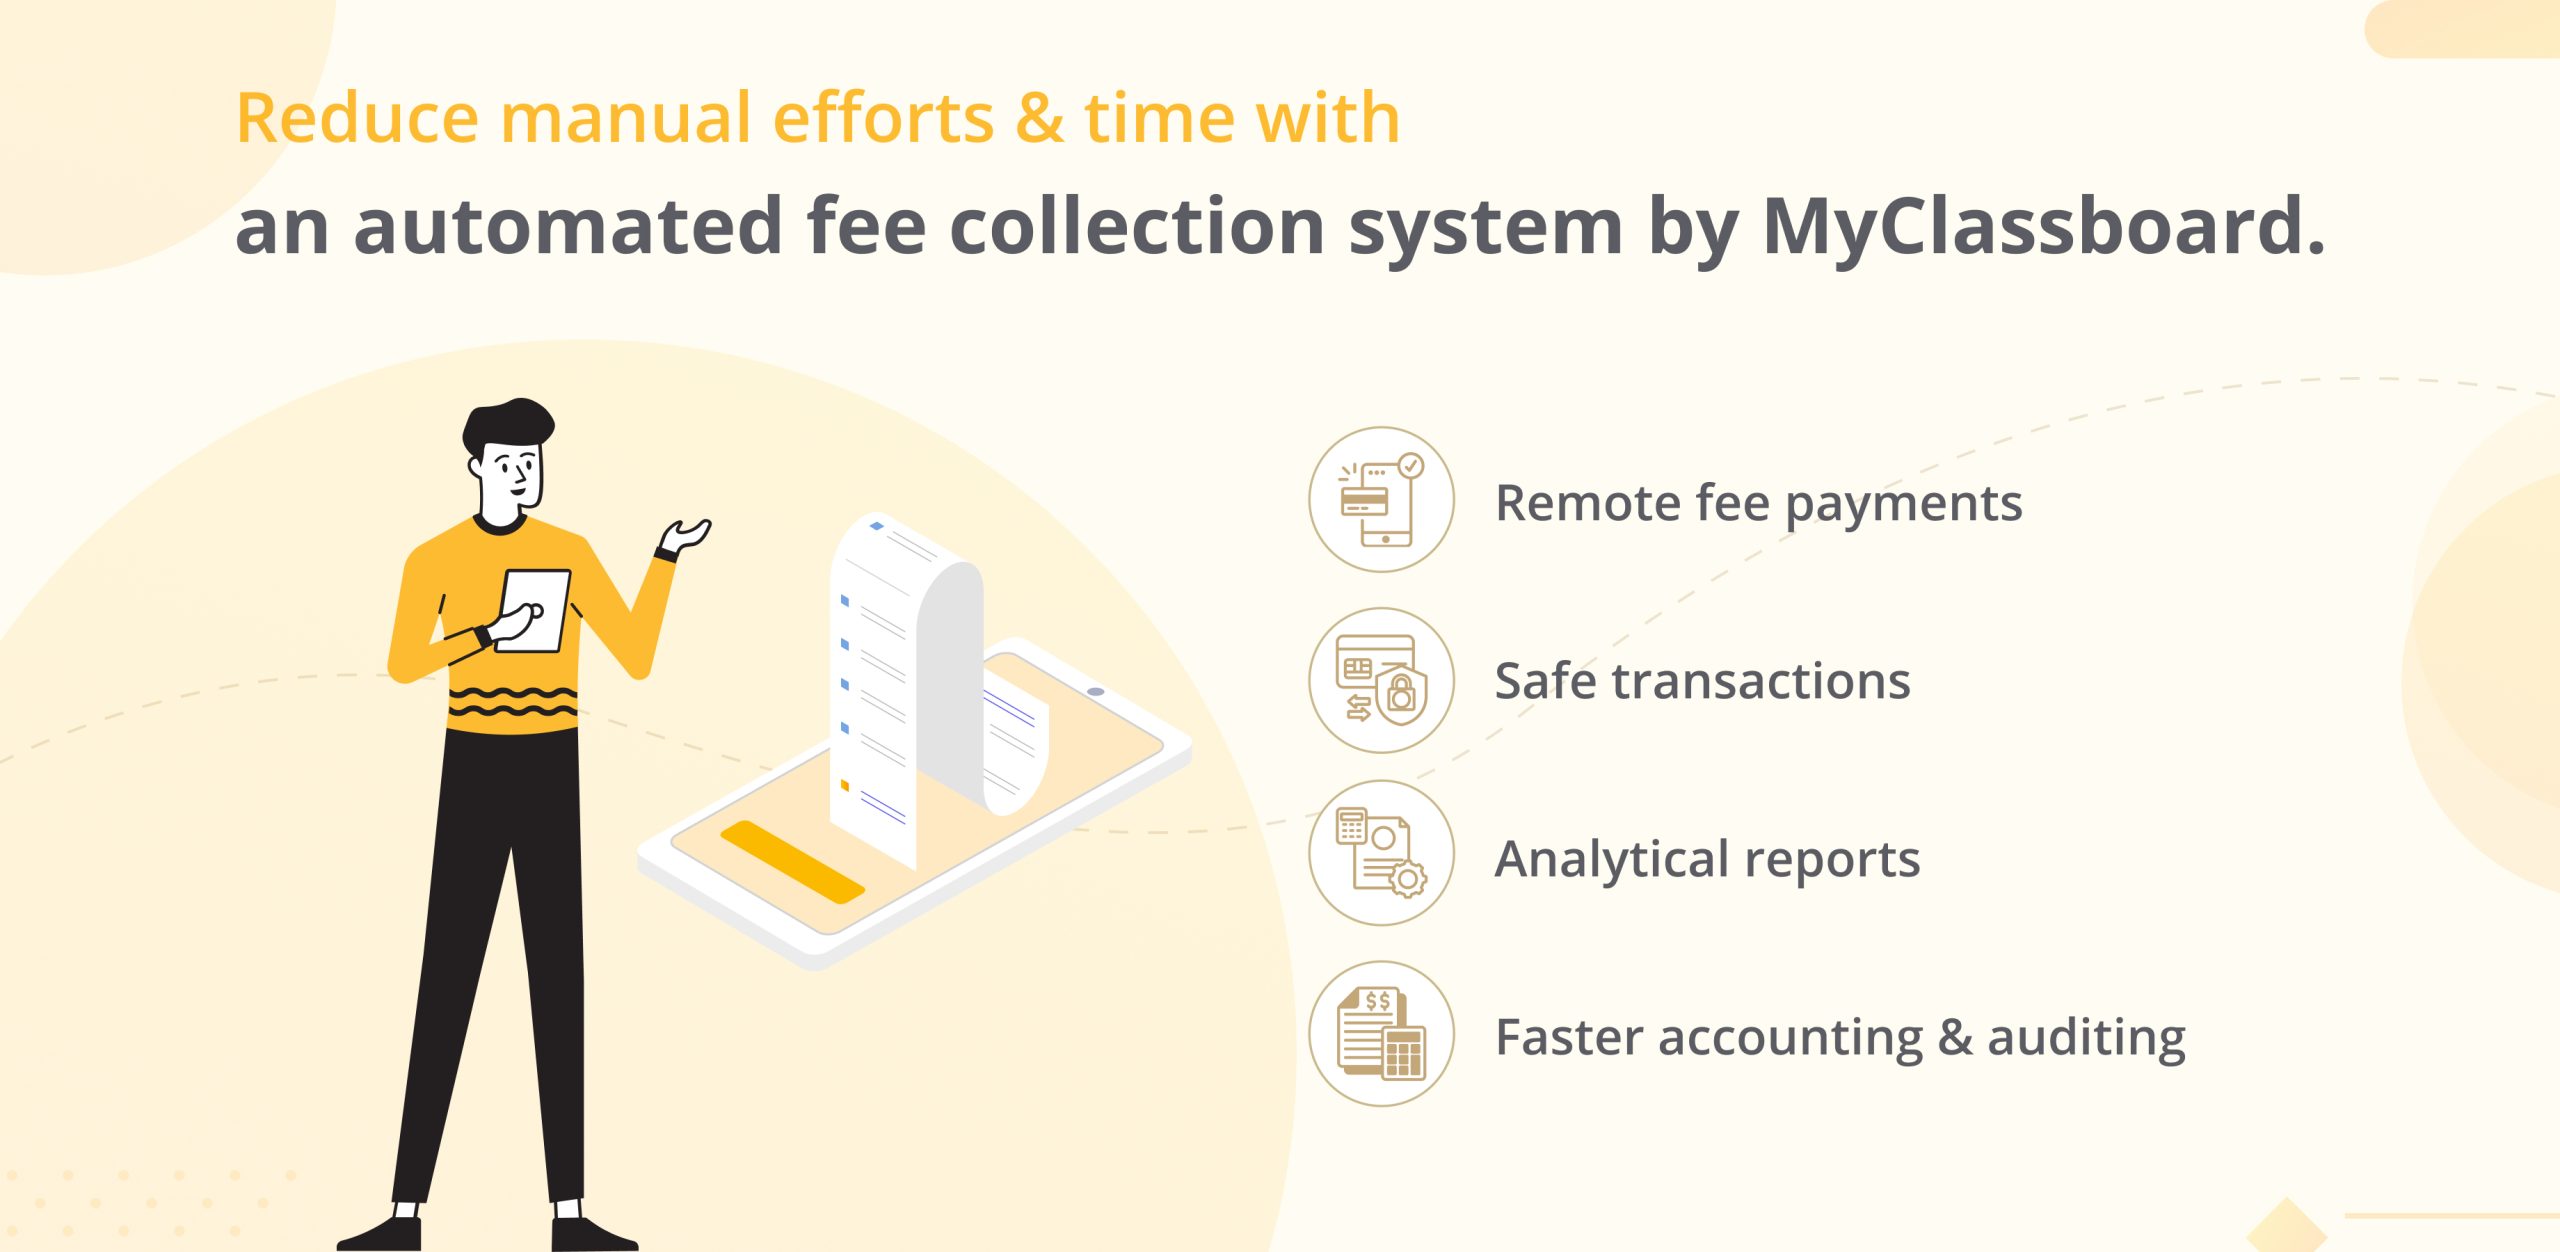 What are the advantages of using an automated fee collection system at school?